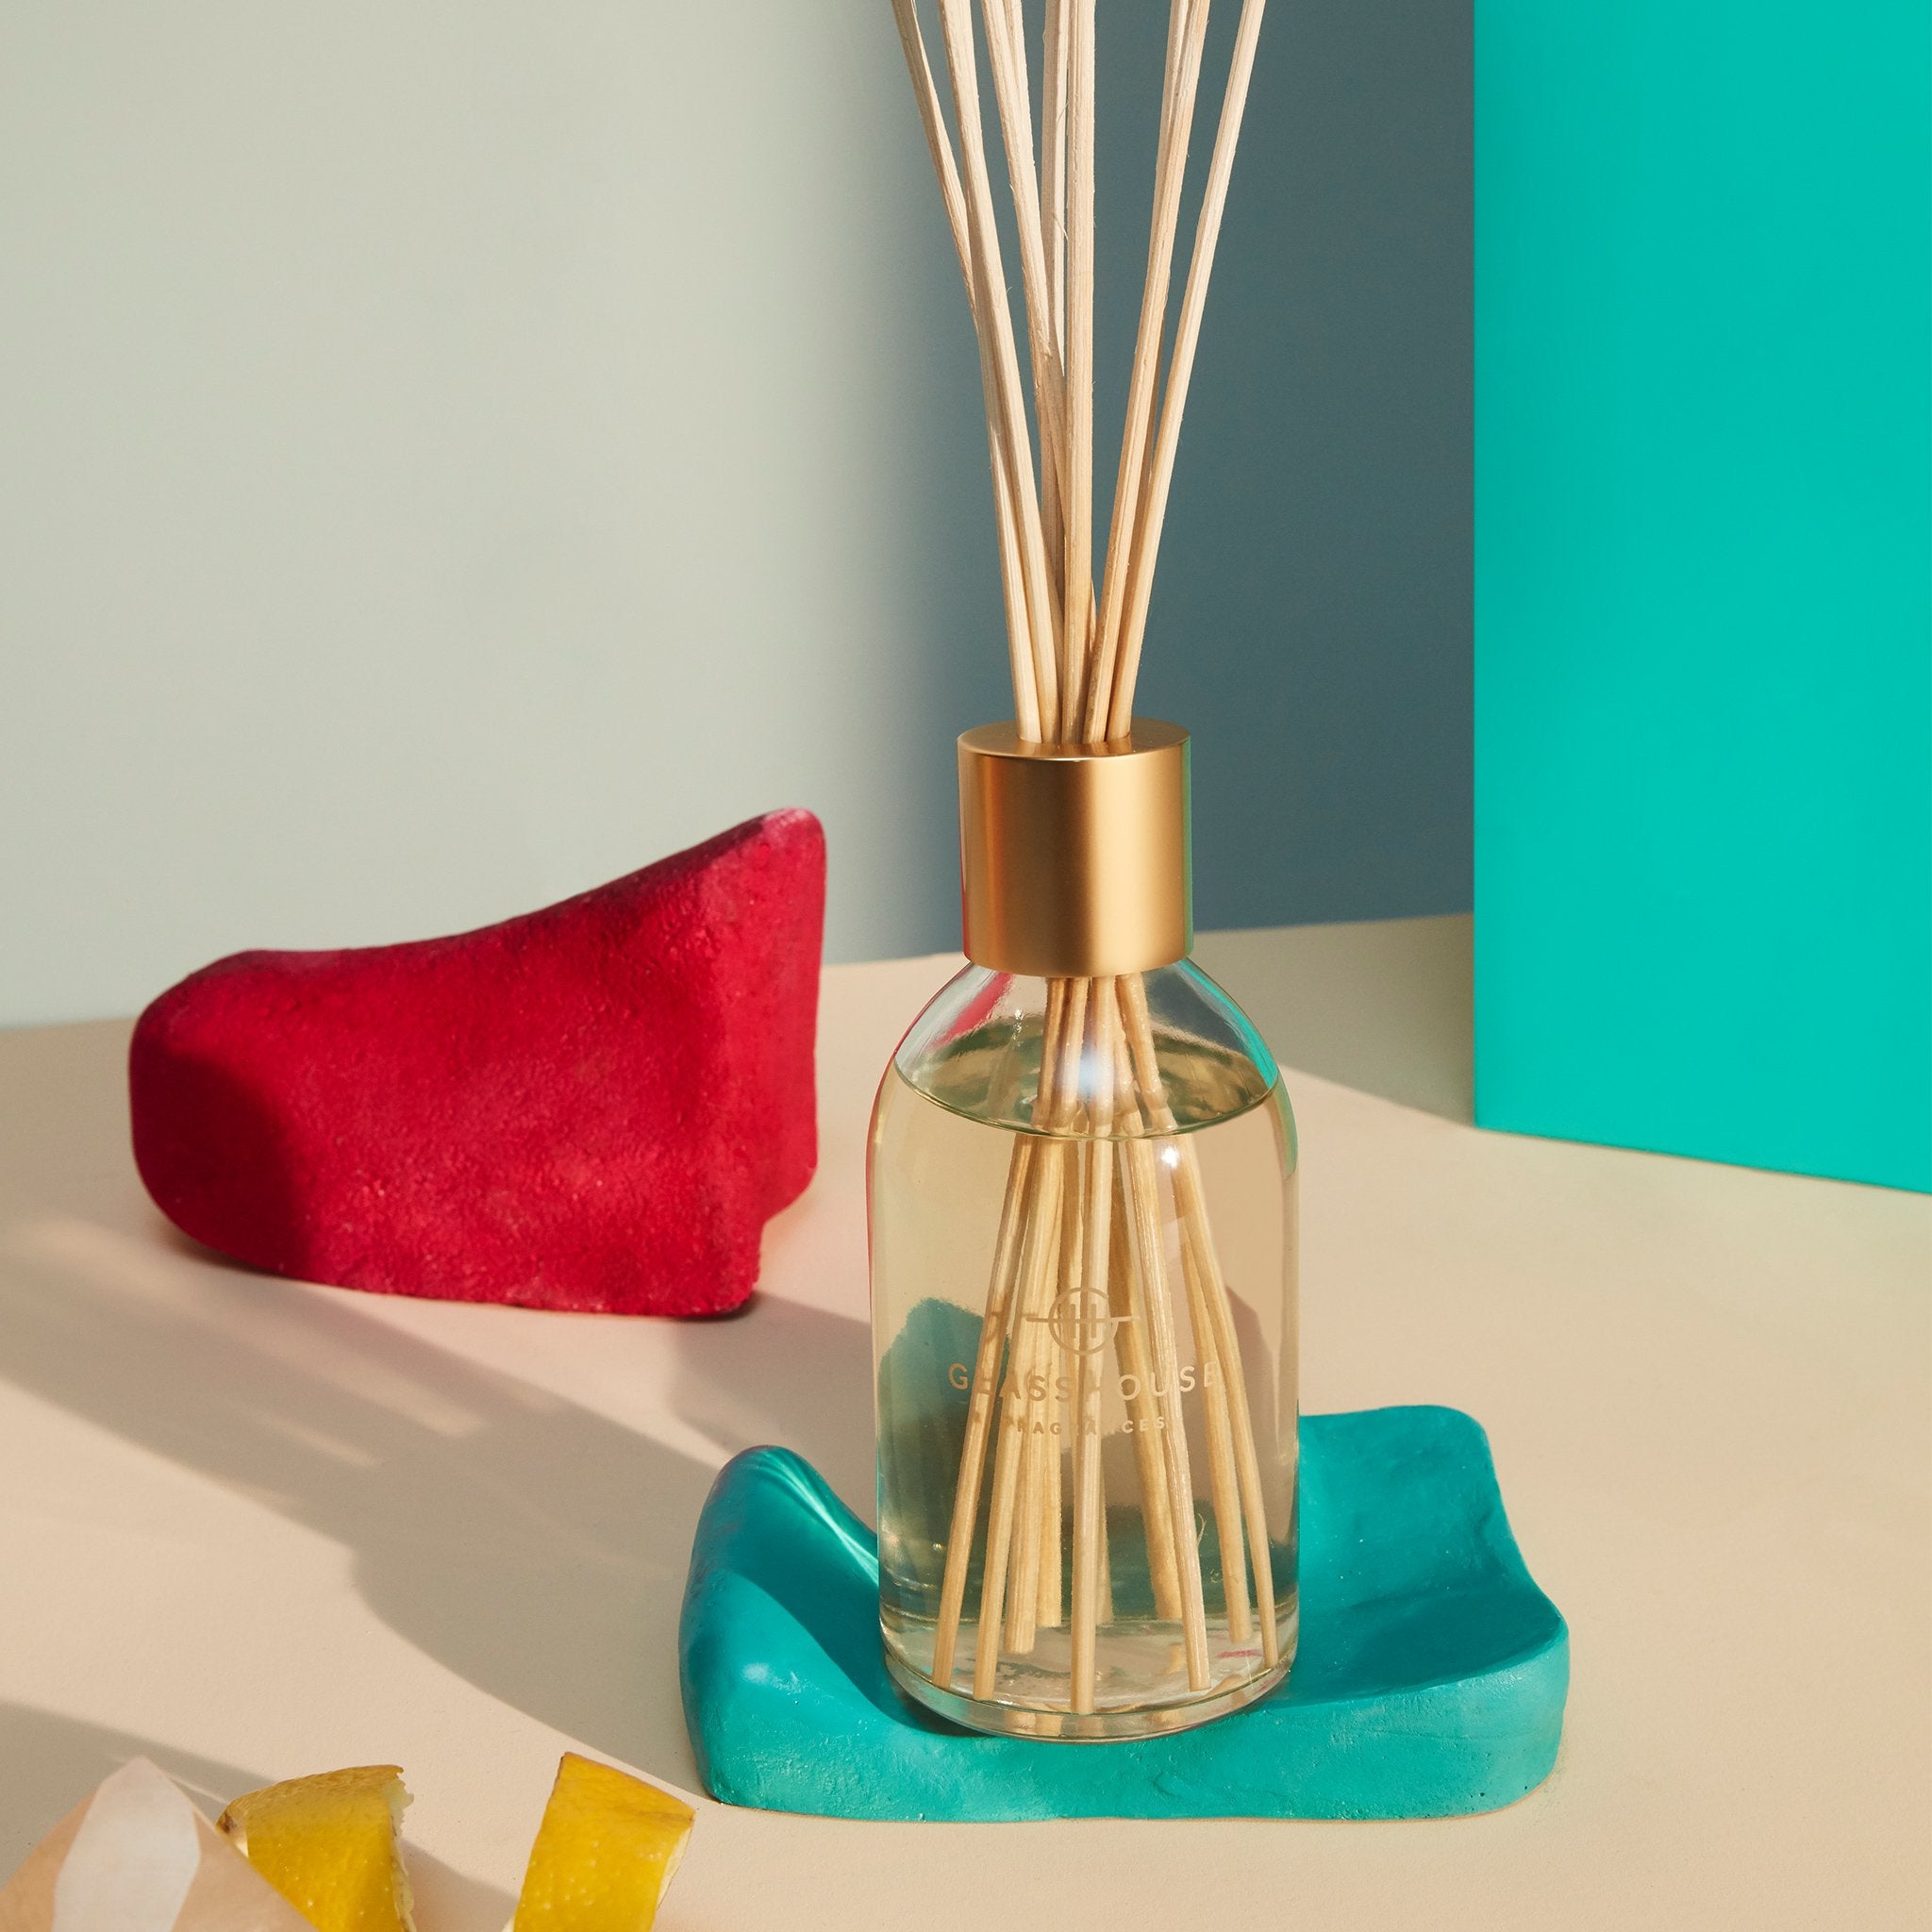 Glasshouse Fragrances scent diffuser on tabletop surrounded by coloured ornaments